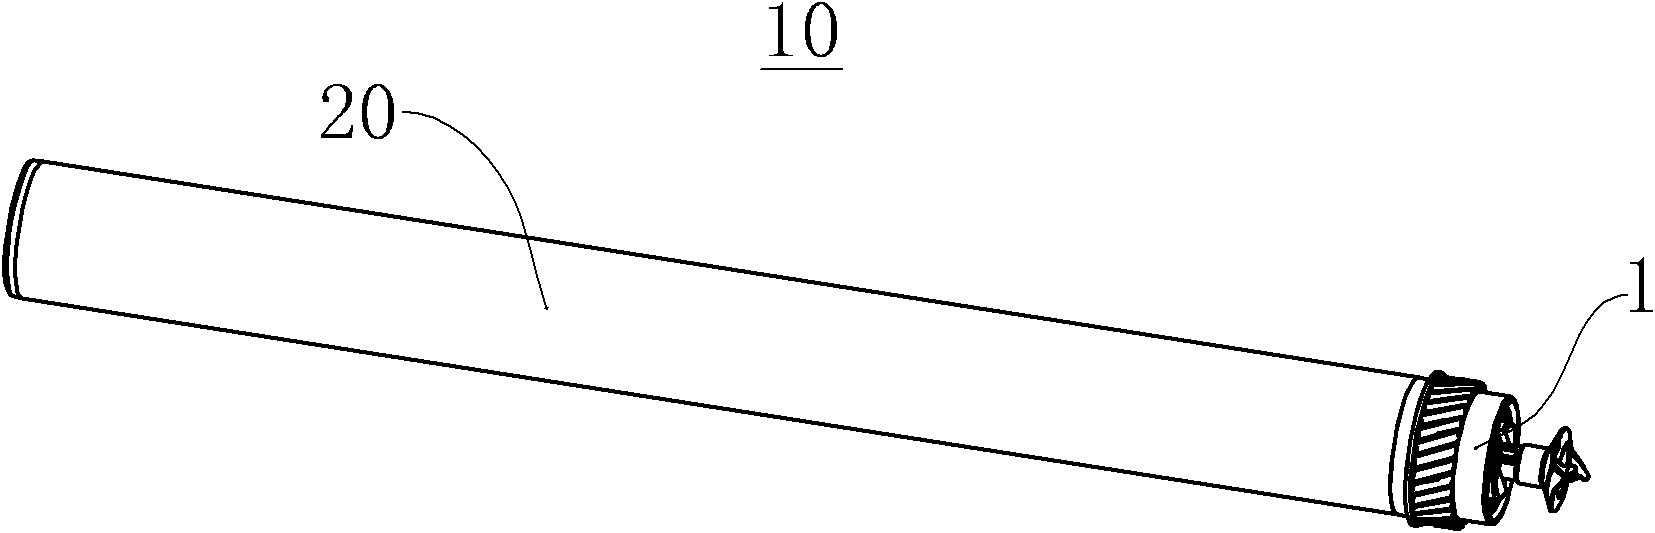 Rotating driving force receiver and drive component